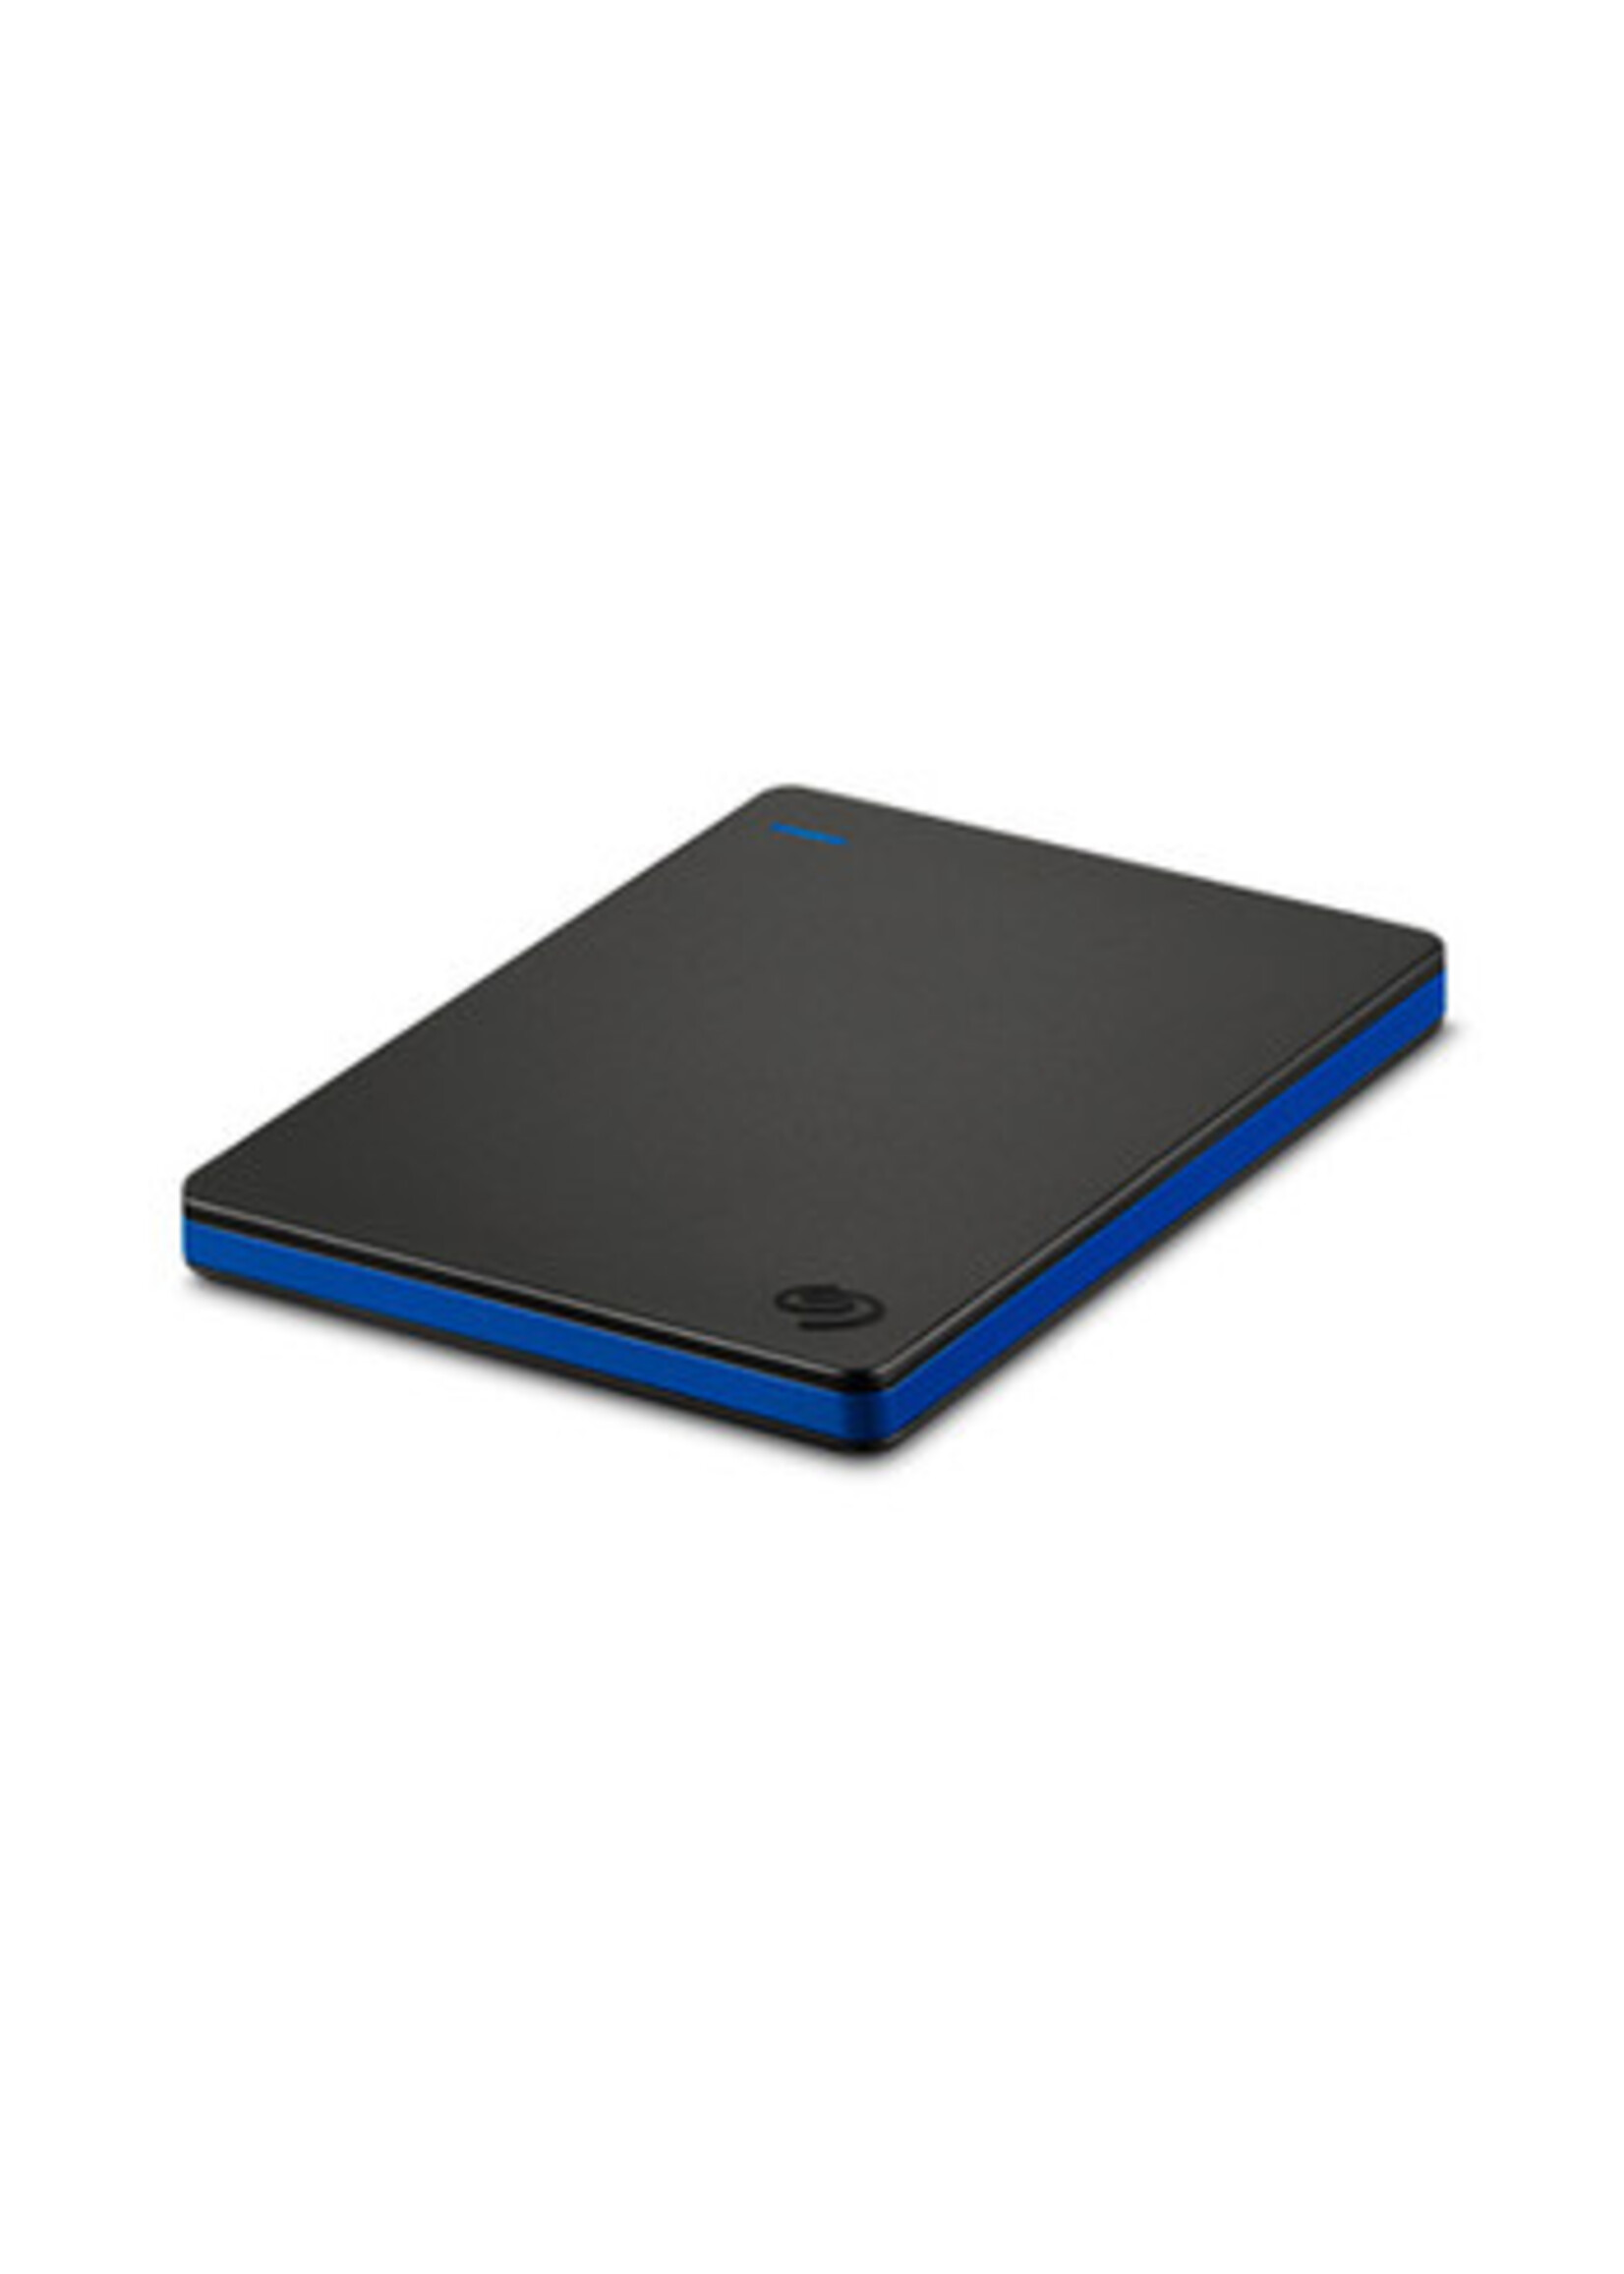 Seagate 2TB USB 3.0 Seagate Game Drive for PS4 portable external hard drive